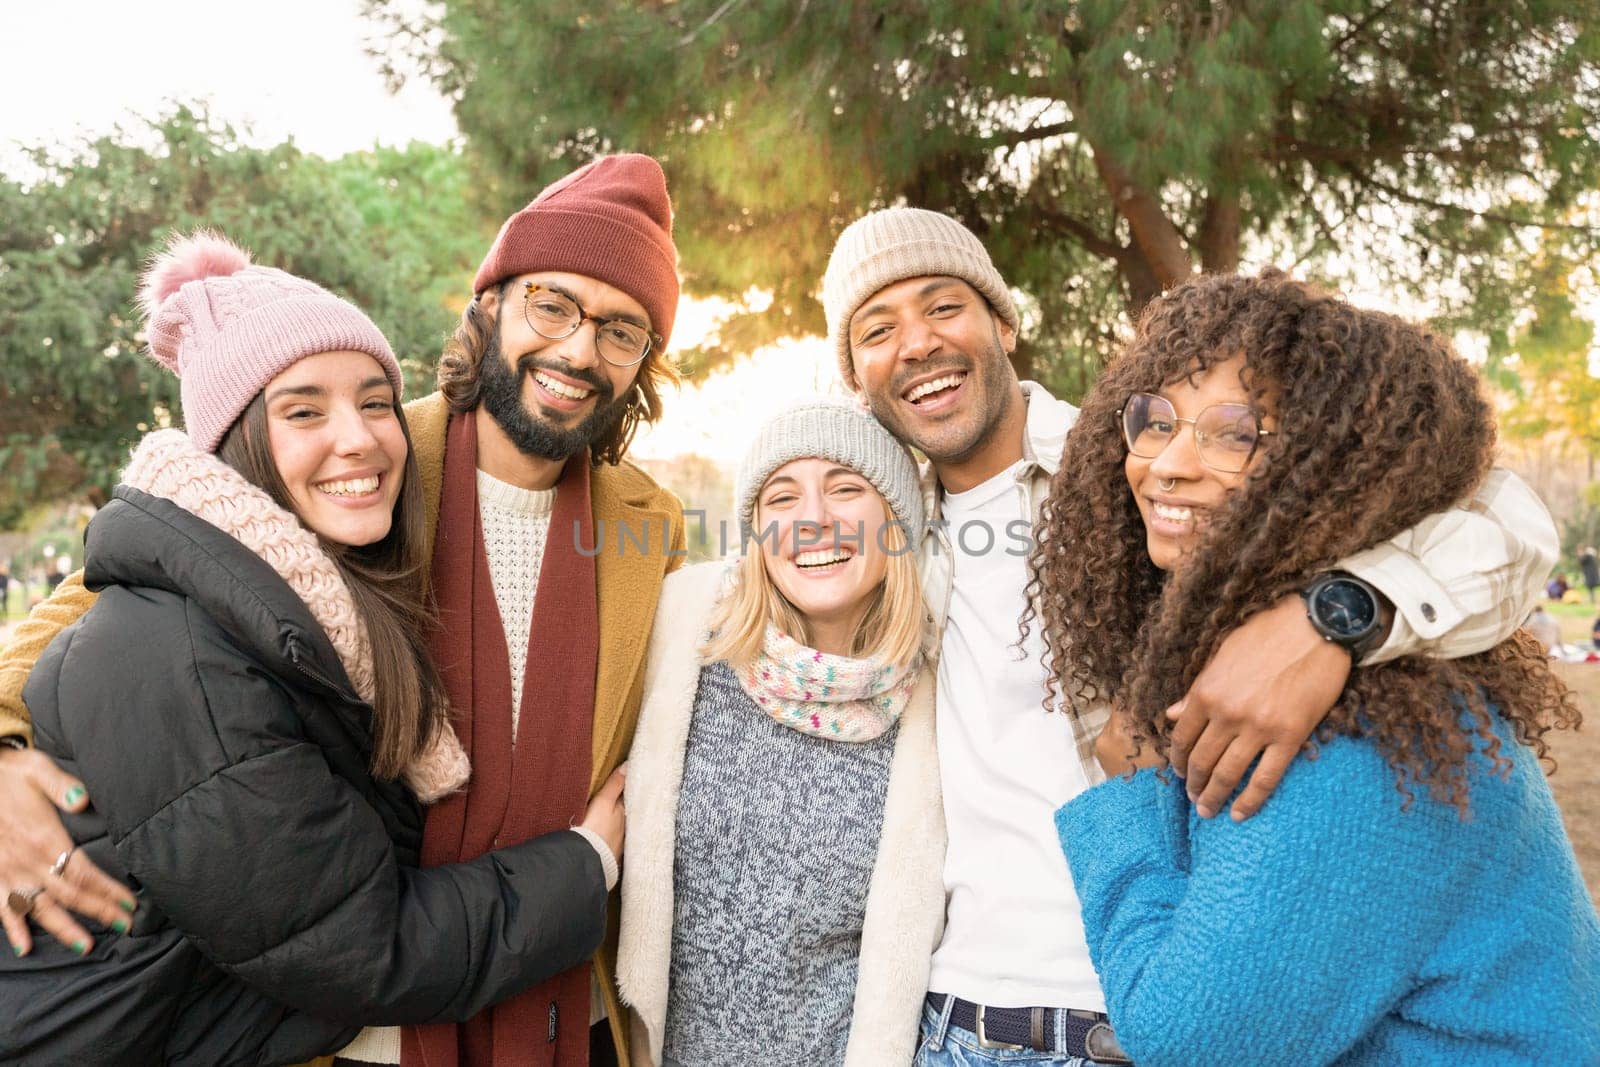 Group of friends looking at camera smiling outdoors in a park in winter. High quality photo